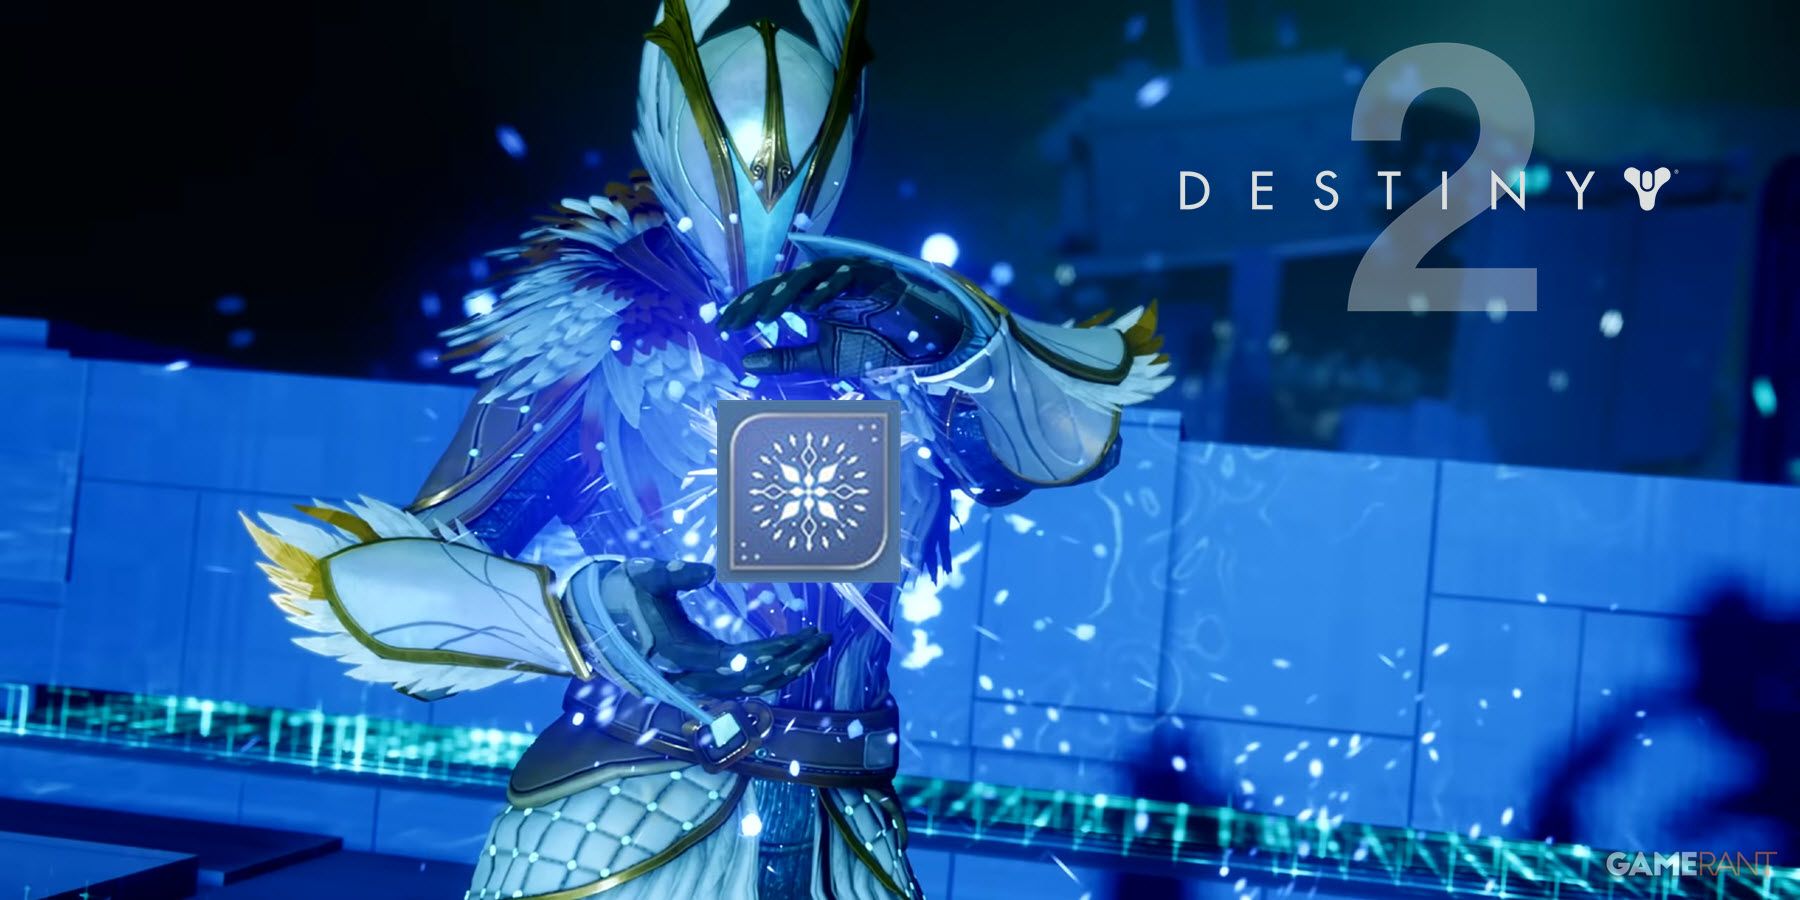 Destiny 2 Player Highlights Easy Way to Quickly Farm Essence of Dawning